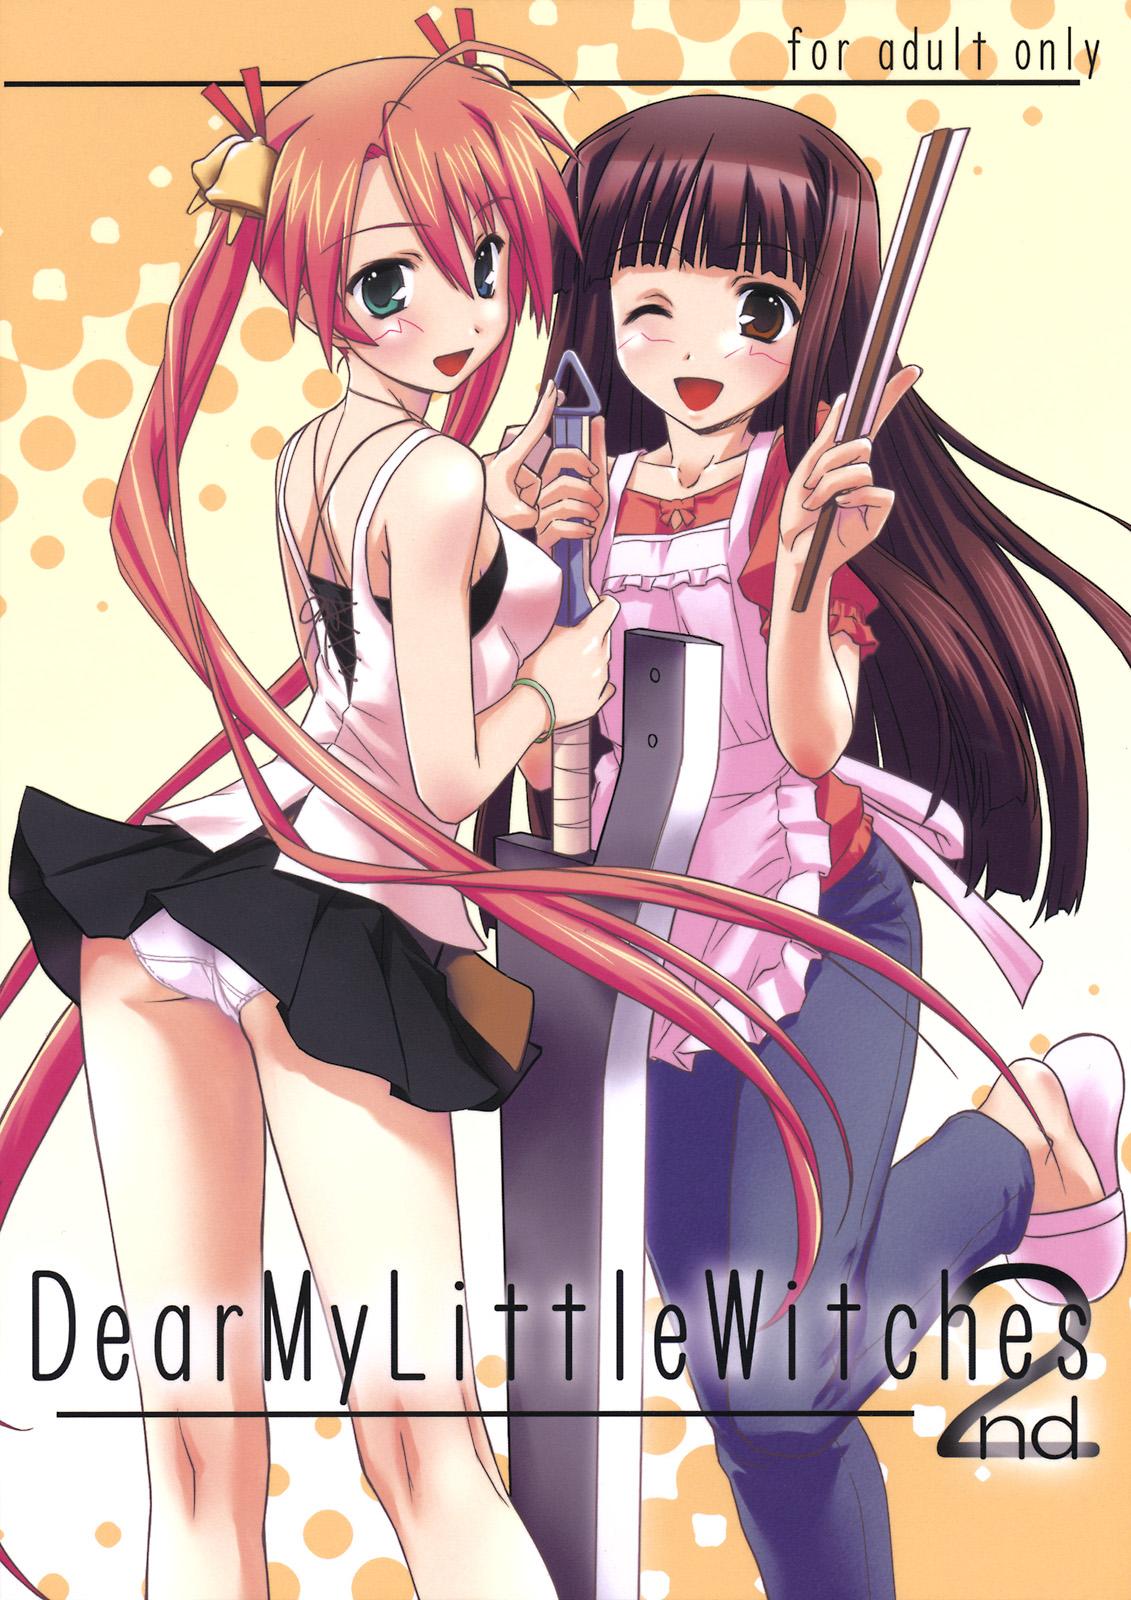  Dear My Little Witches 2nd - Mahou sensei negima Indian - Page 1